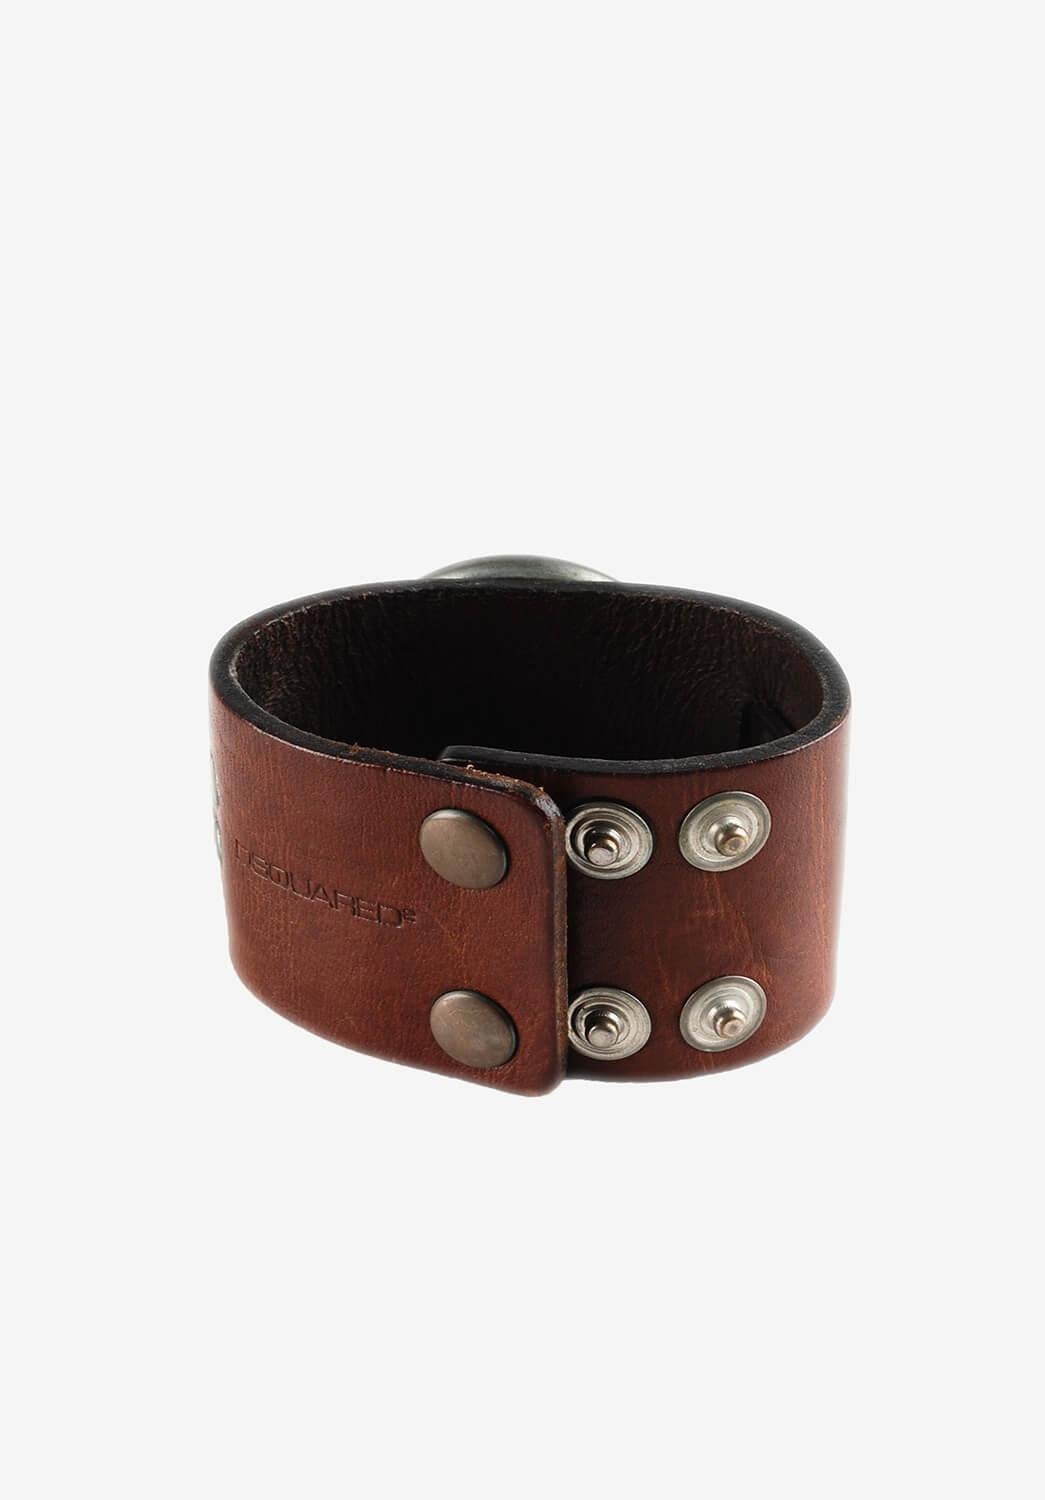 Item for sale is 100% genuine Dsquared2 Men Leather Bracelet  
Color: Brown
(An actual color may a bit vary due to individual computer screen interpretation)
Material: Leather, metal
Tag size: One Size (3 positions)
This bracelet is great quality